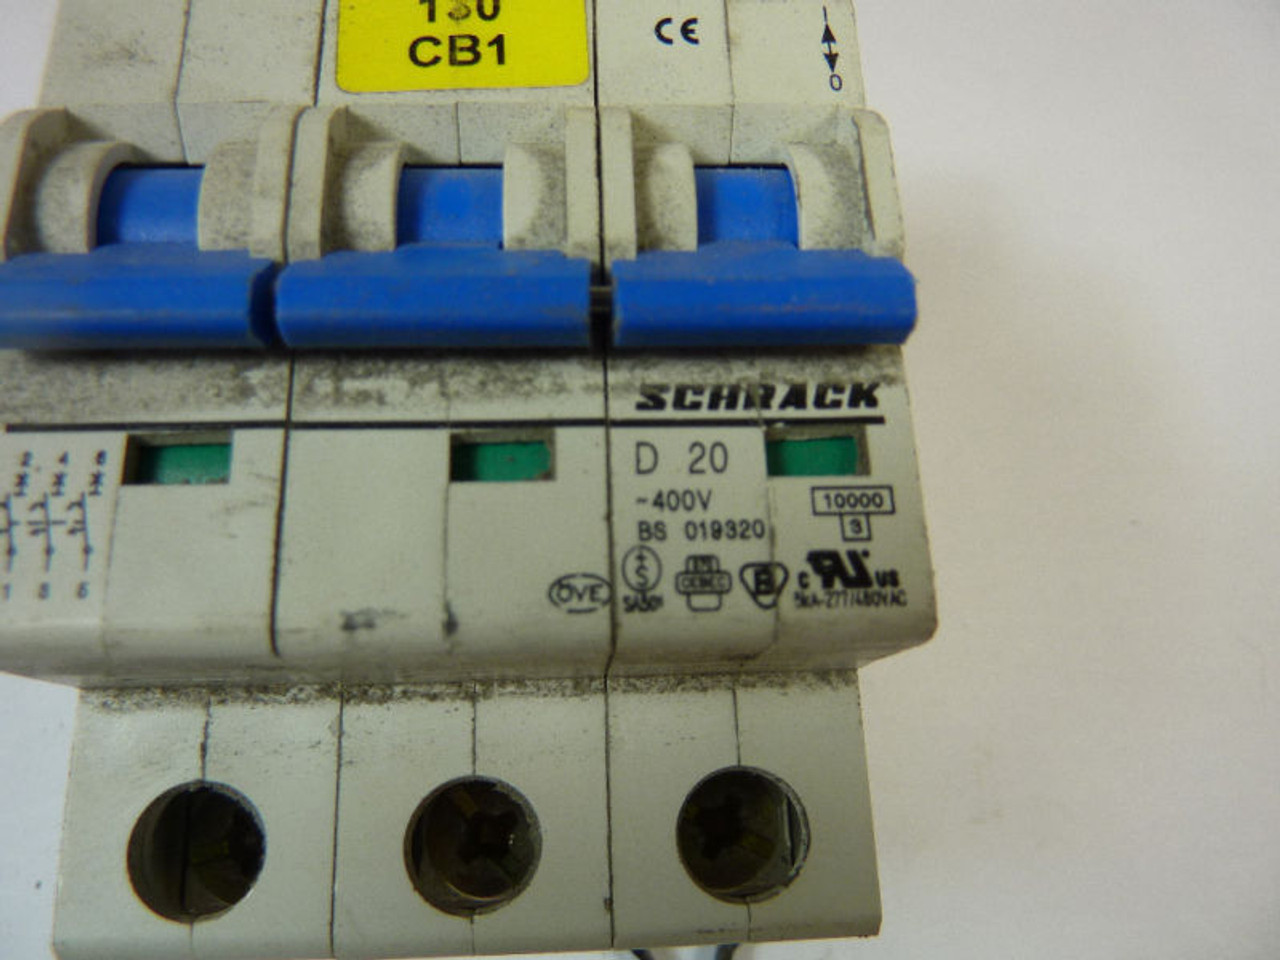 Schrack BS-019320 Circuit Breaker 20A 3-Pole USED